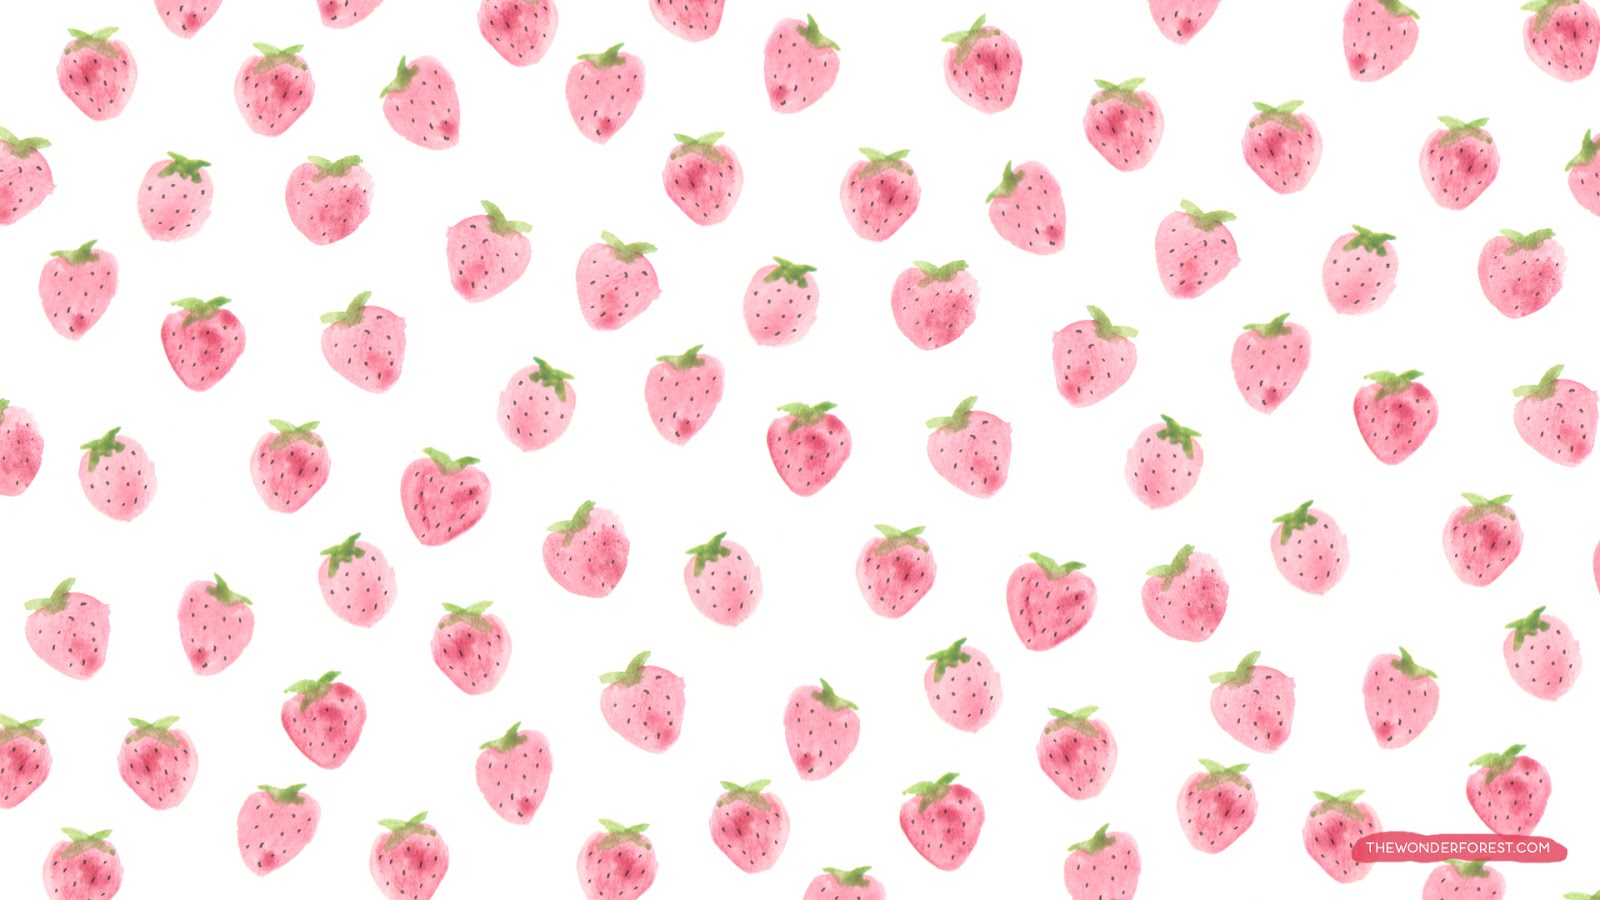 Fruity iPhone and Desktop Wallpapers Wonder Forest